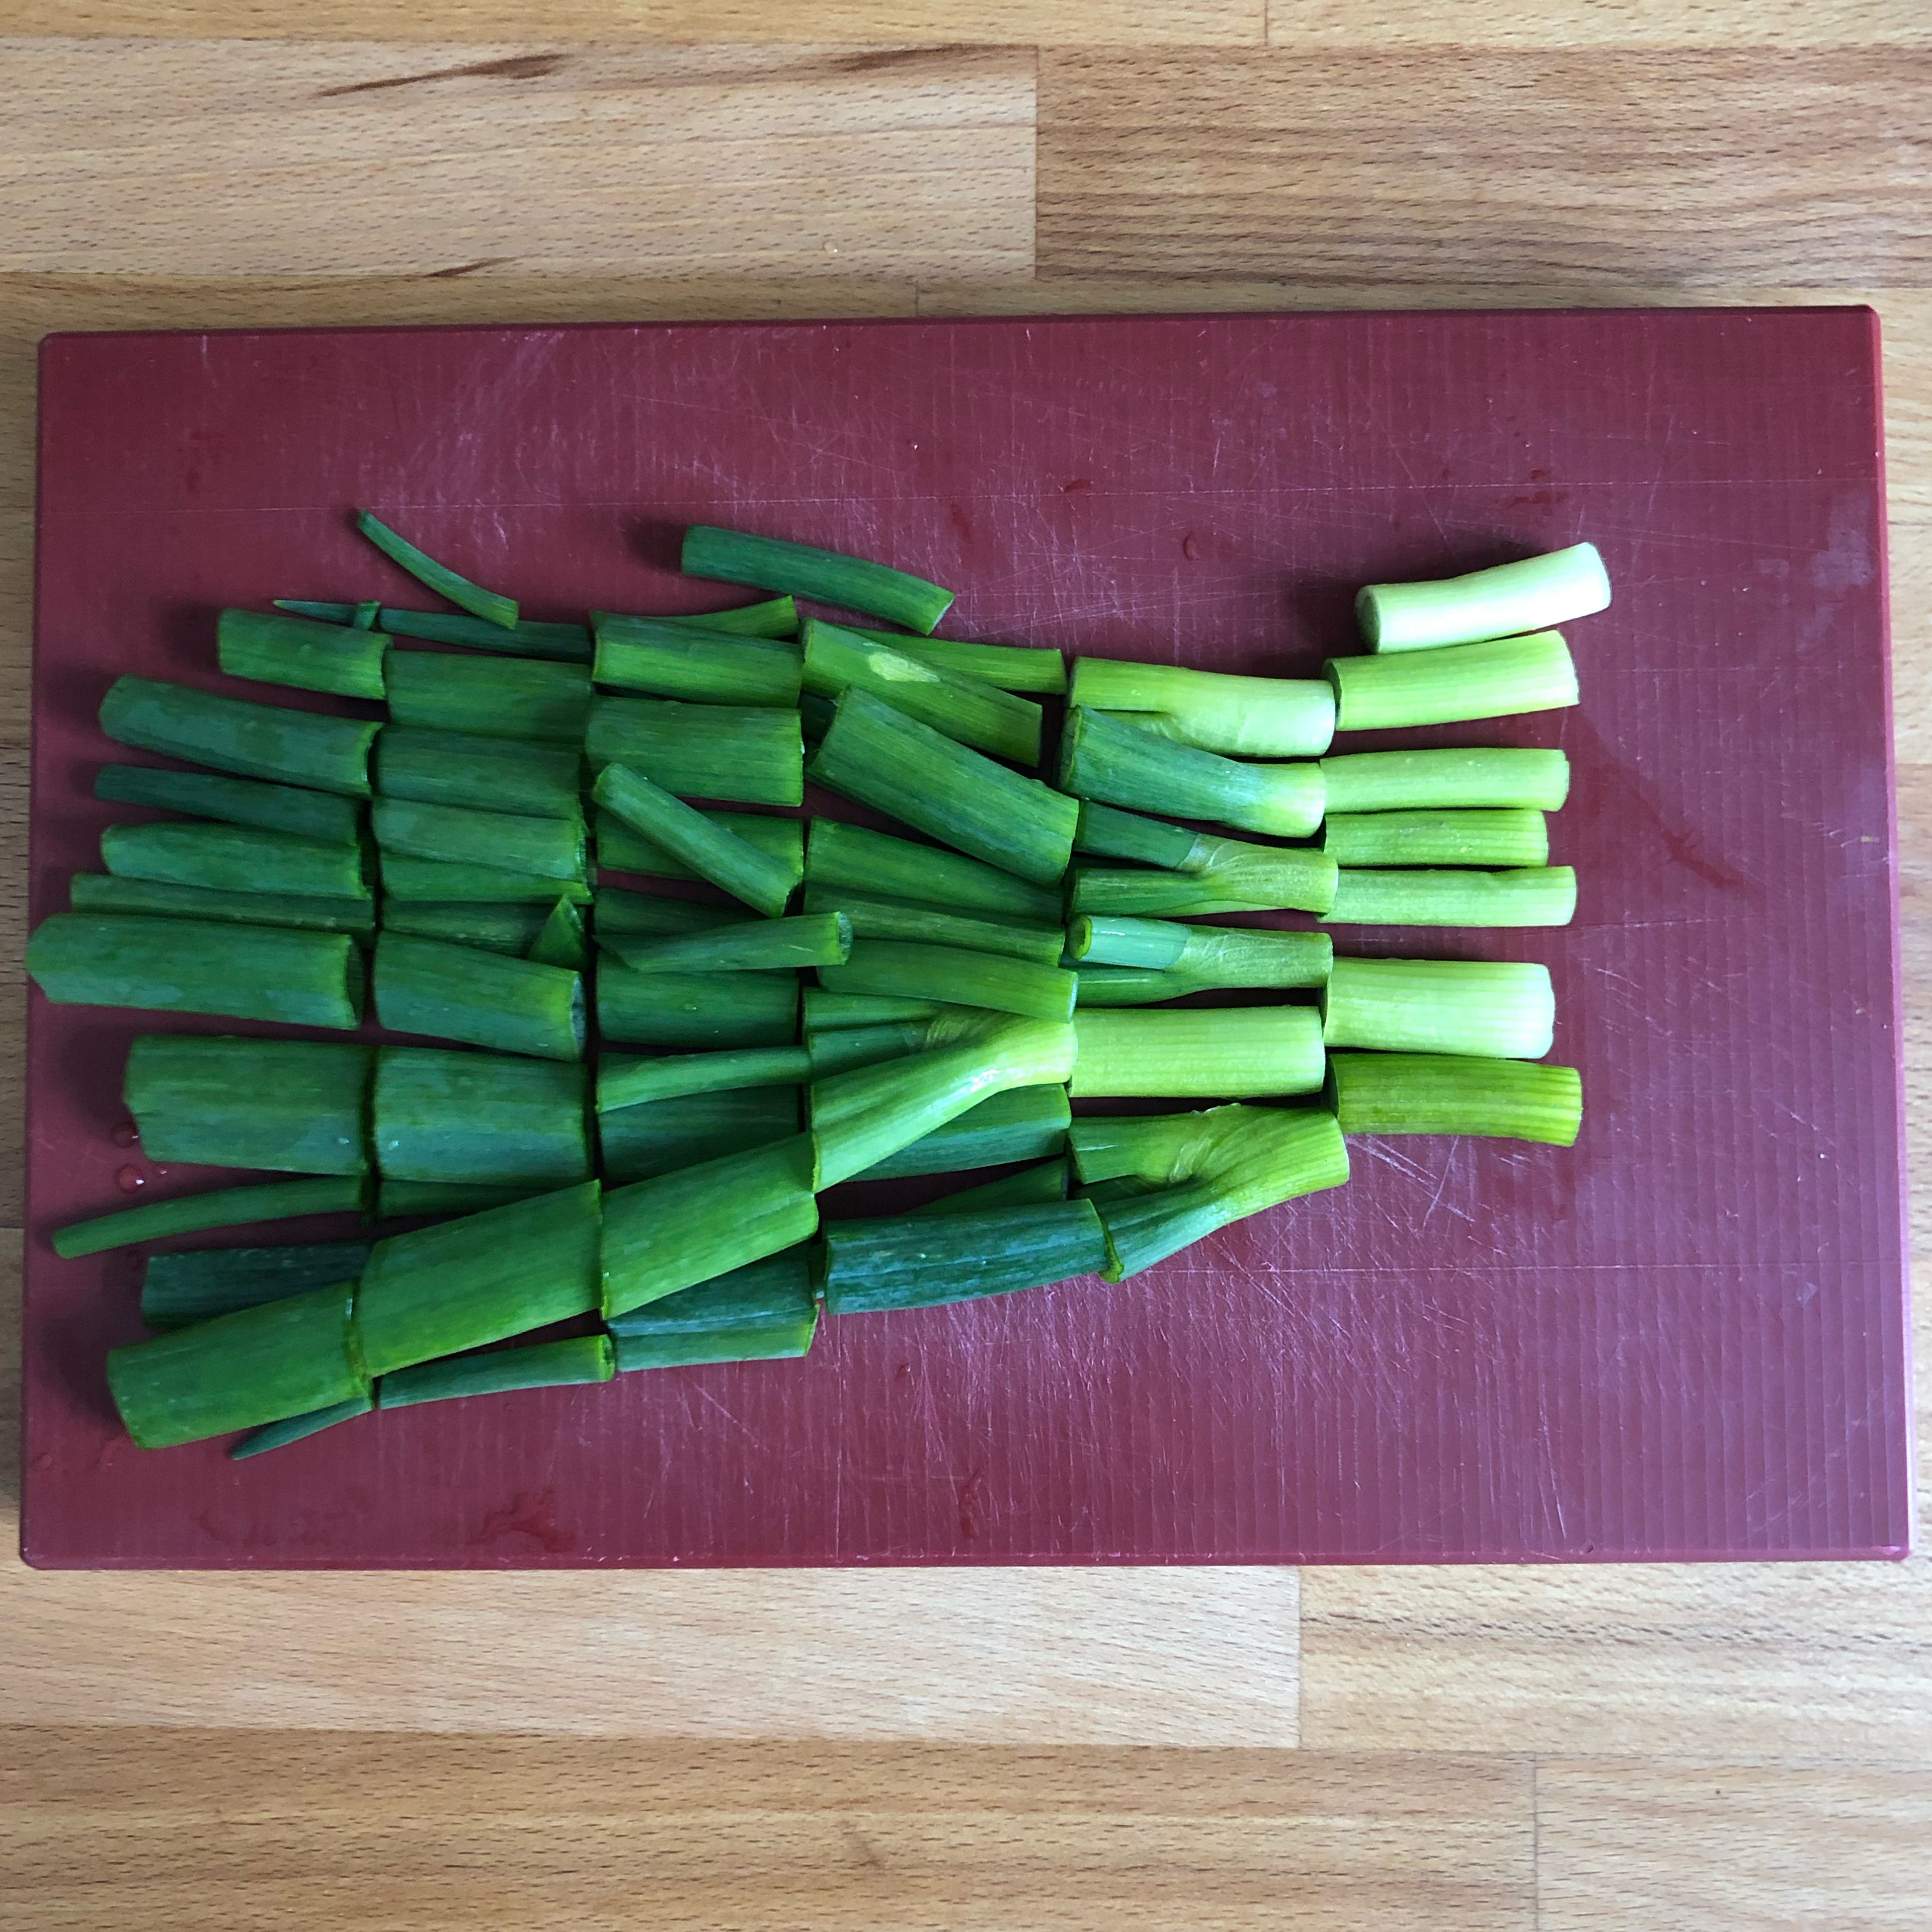 Trim ends from scallions and chop into lengths (about 1-in. / 2.5 cm). Halve lemon and cut one half into quarters for serving.